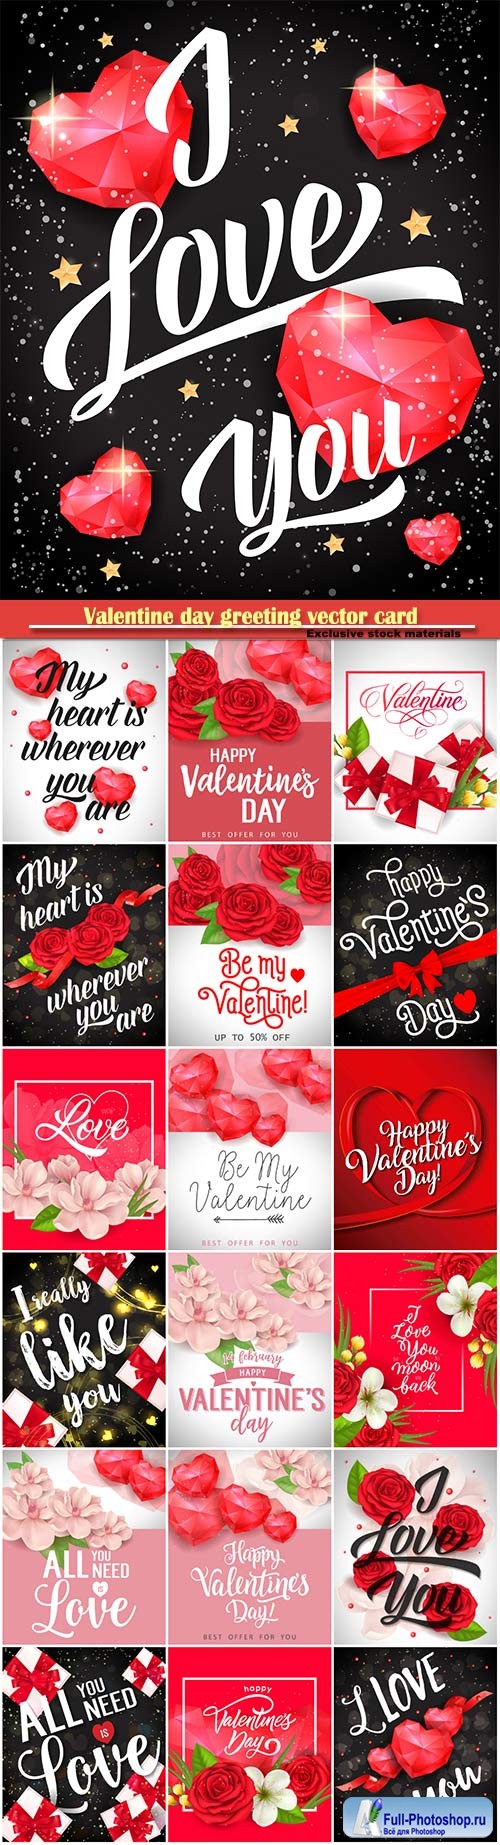 Valentine day greeting vector card, hearts i love you # 21